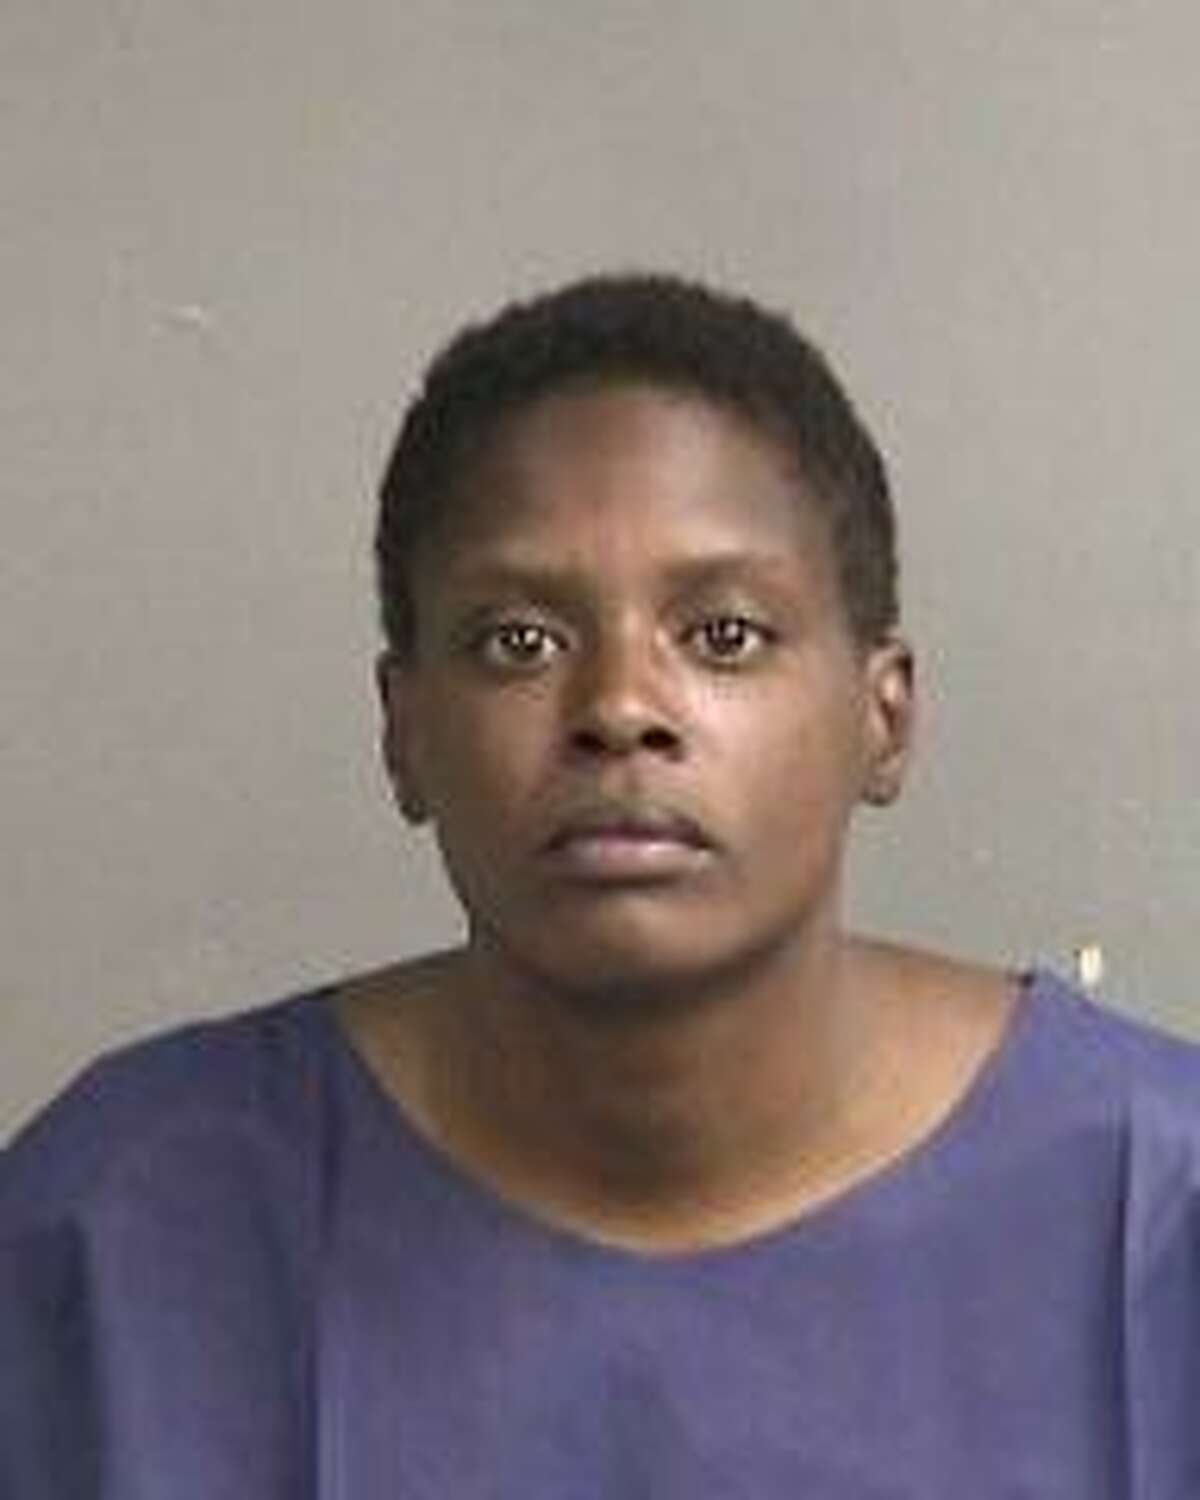 Iyona Hammond, 32, of Oakland was arrested after she allegedly stabbed a child multiple times while robbing a Wells Fargo bank in San Leandro on Monday, June 6, 2016. The child was hospitalized but later released after surgery, authorities said.